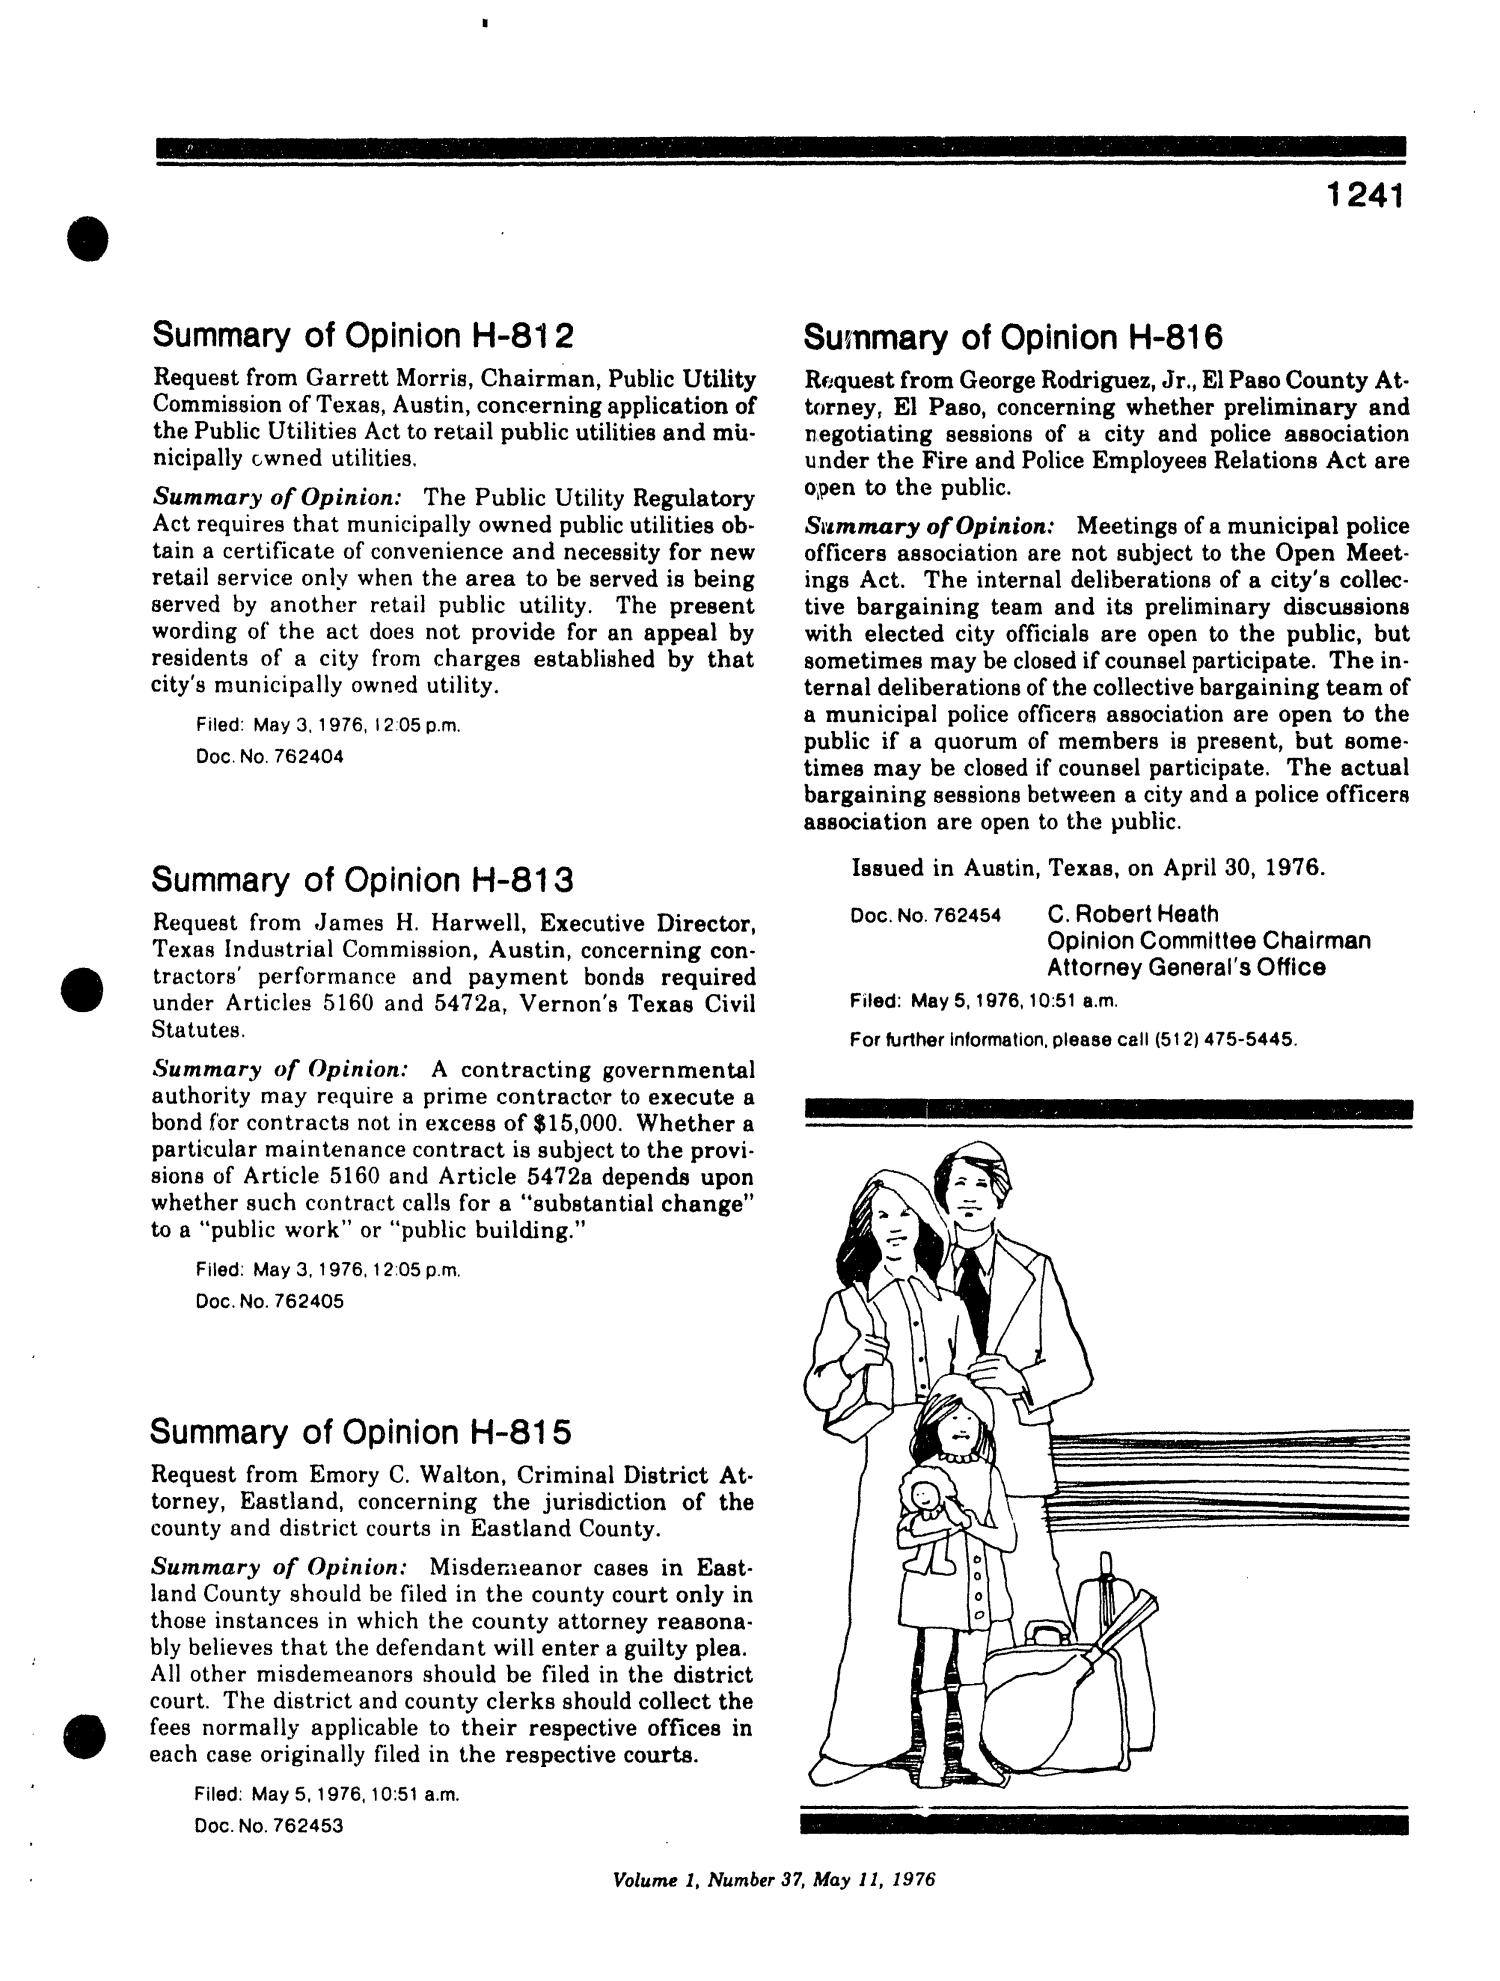 Texas Register, Volume 1, Number 37, Pages 1237-1276, May 11, 1976
                                                
                                                    1241
                                                